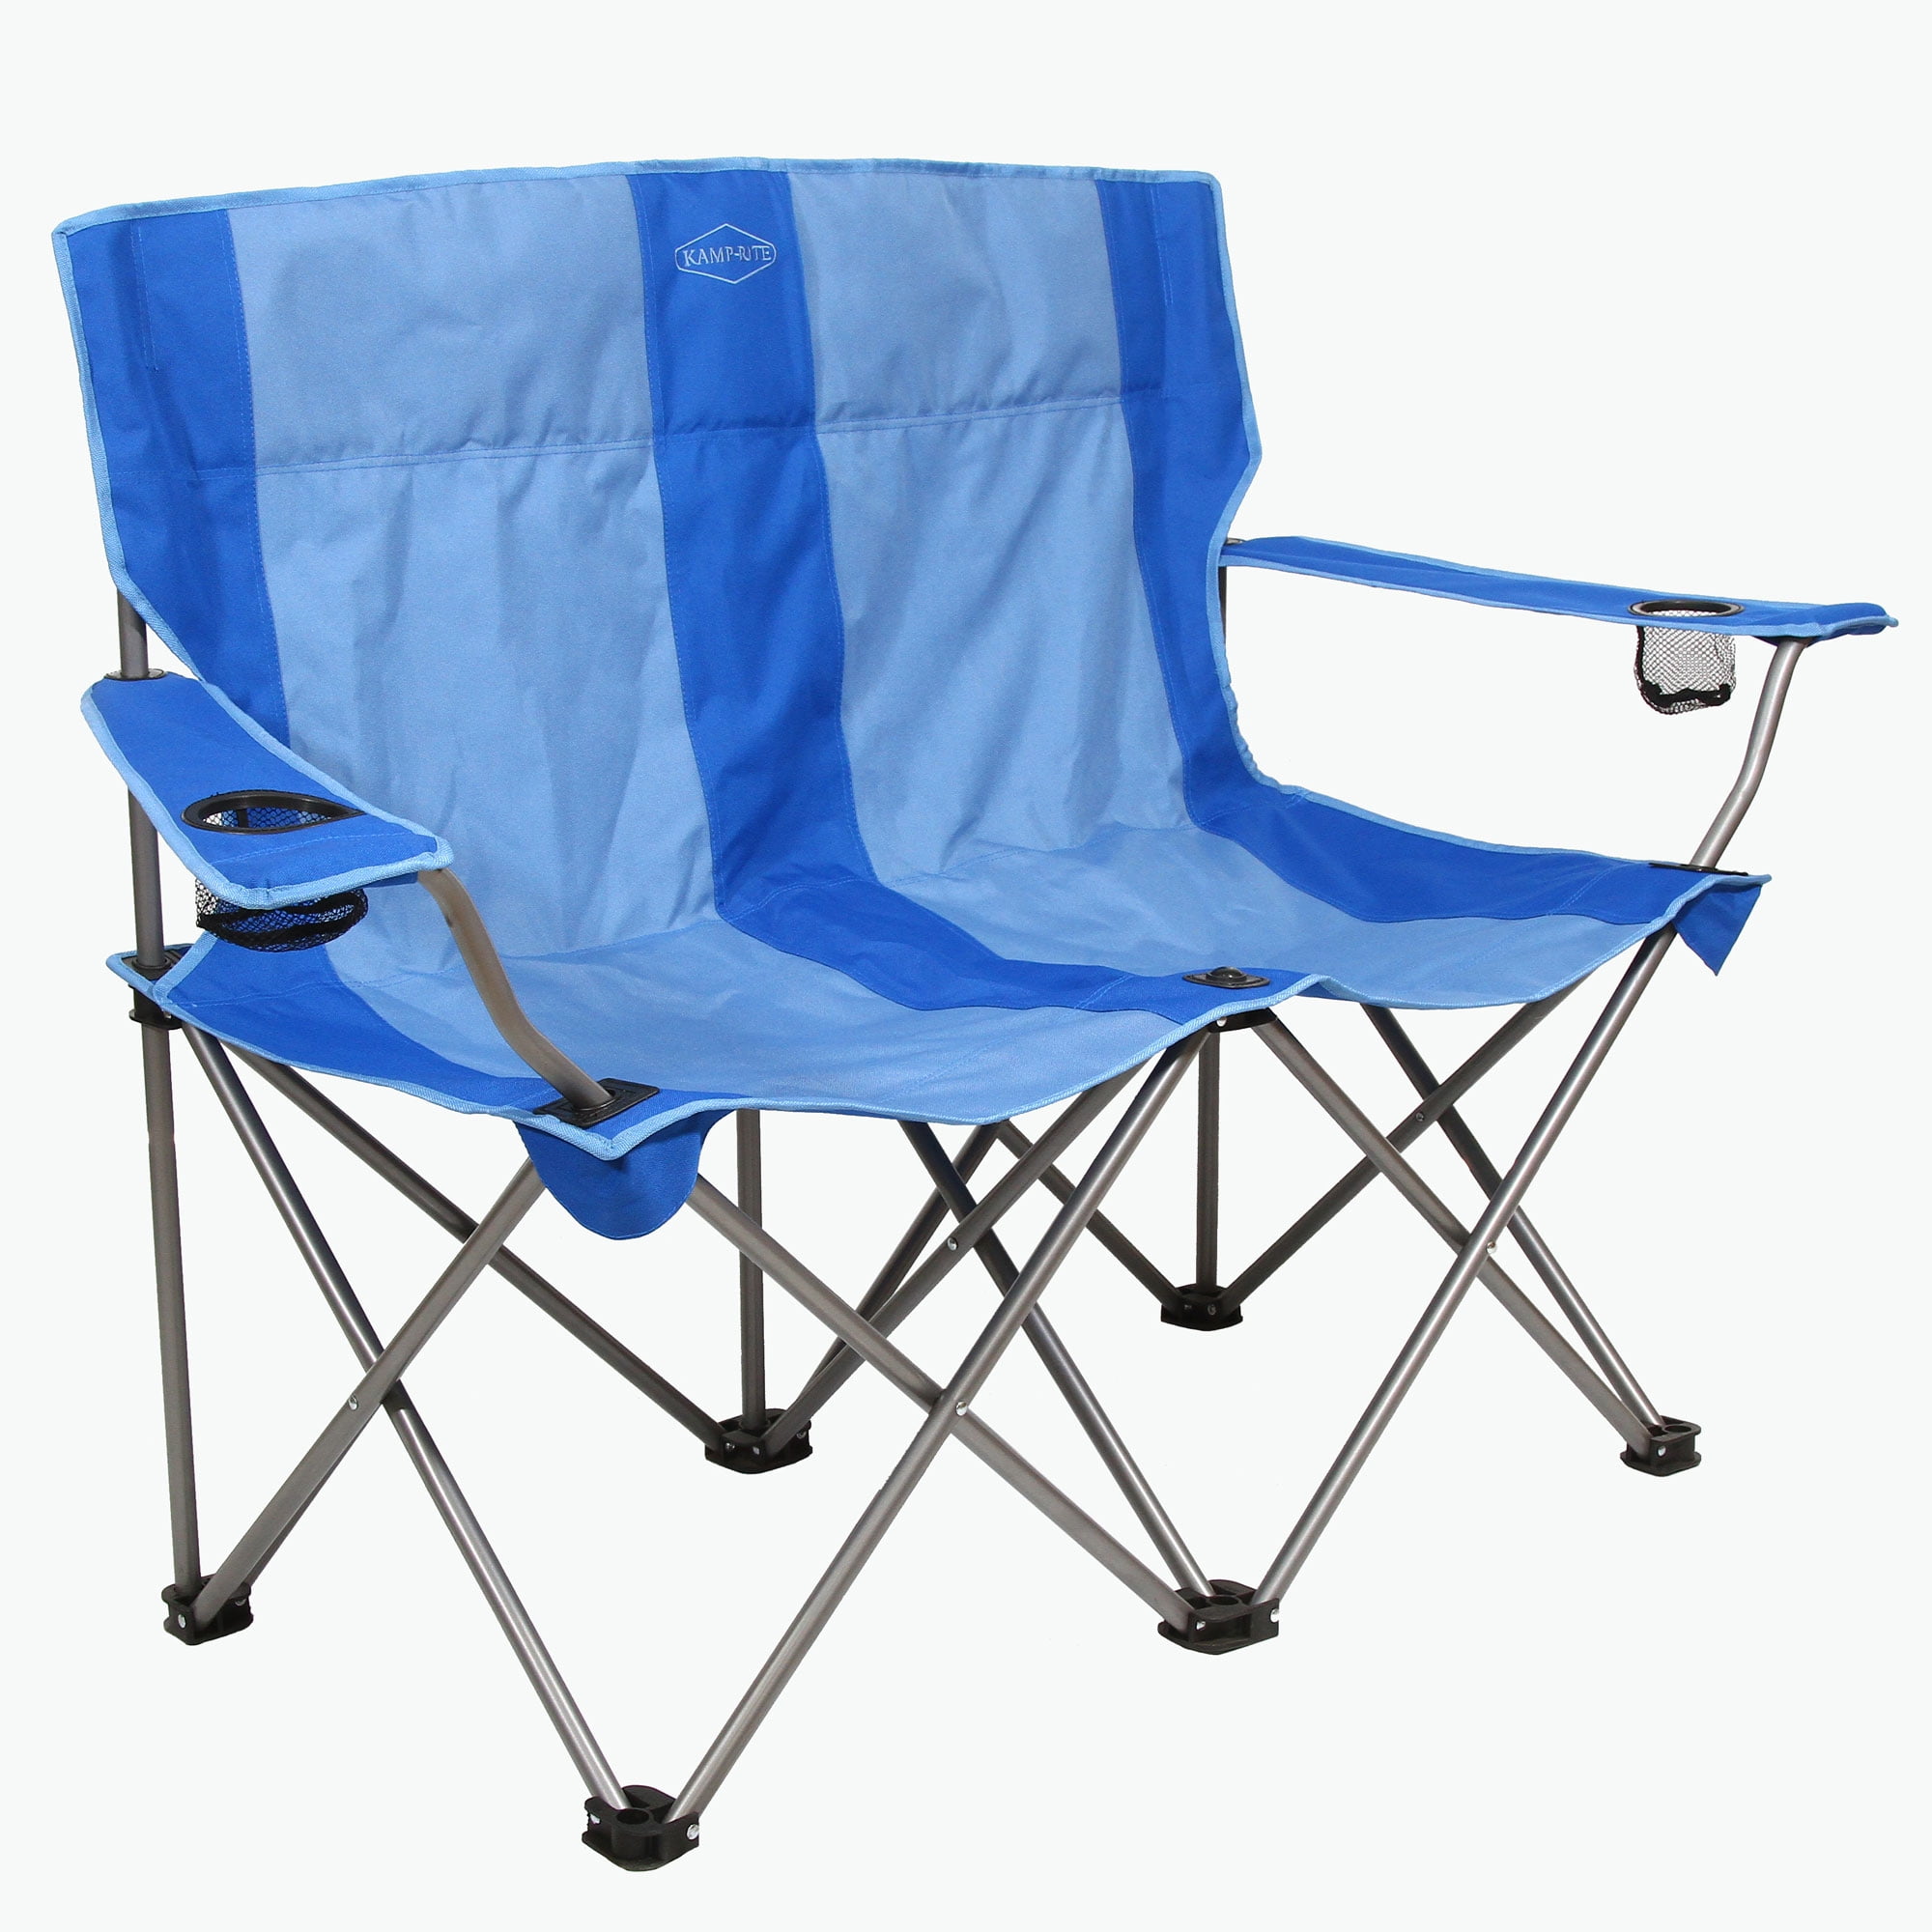 Folding Chairs Set Patio Lounge Outdoor For Kids Camping Foldable Portable Sport 